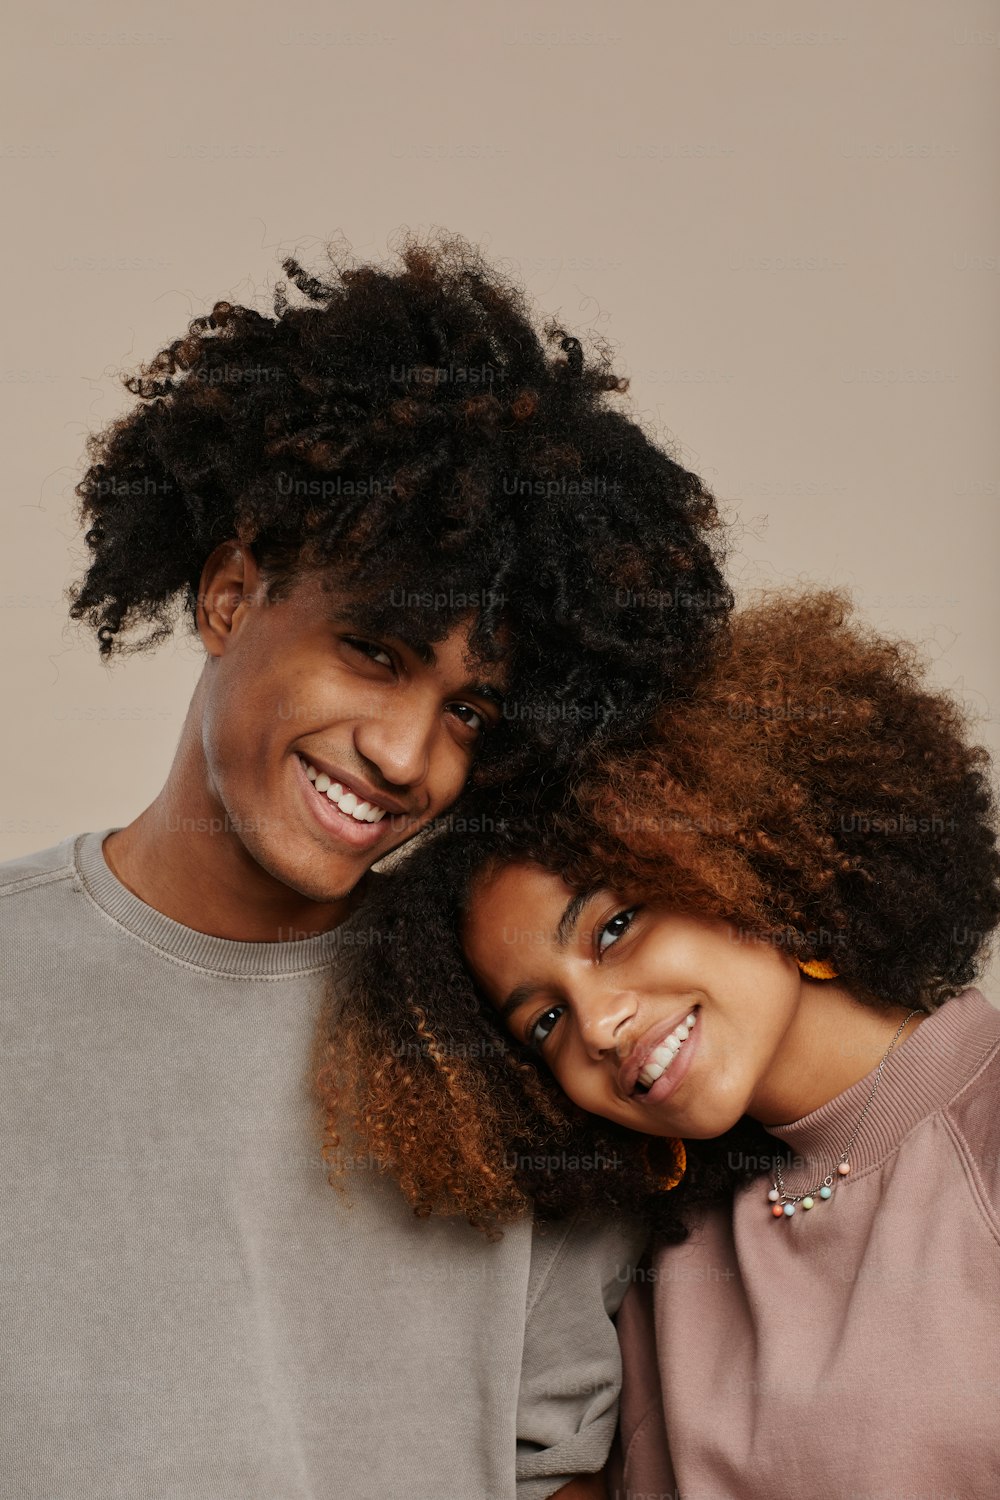 Minimal portrait of young African-American couple with natural curly hair smiling at camera while standing against light beige background